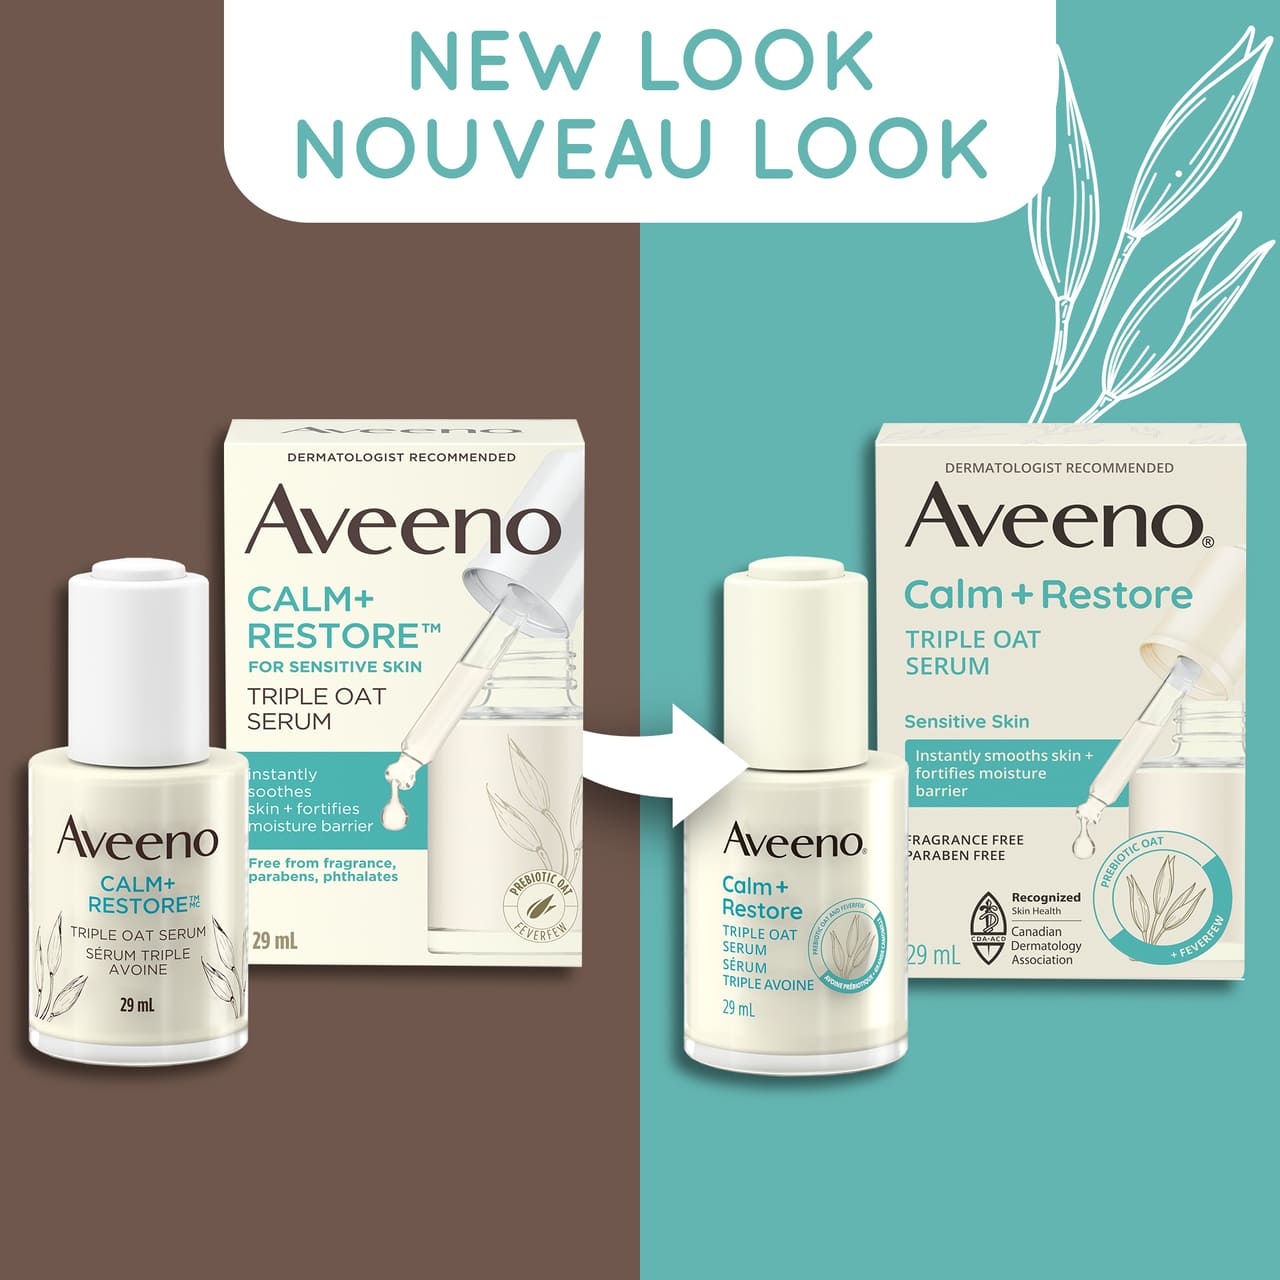 Old and new packaging of AVEENO® Calm + Restore Triple Oat Serum, 29mL bottle, with text 'new look'